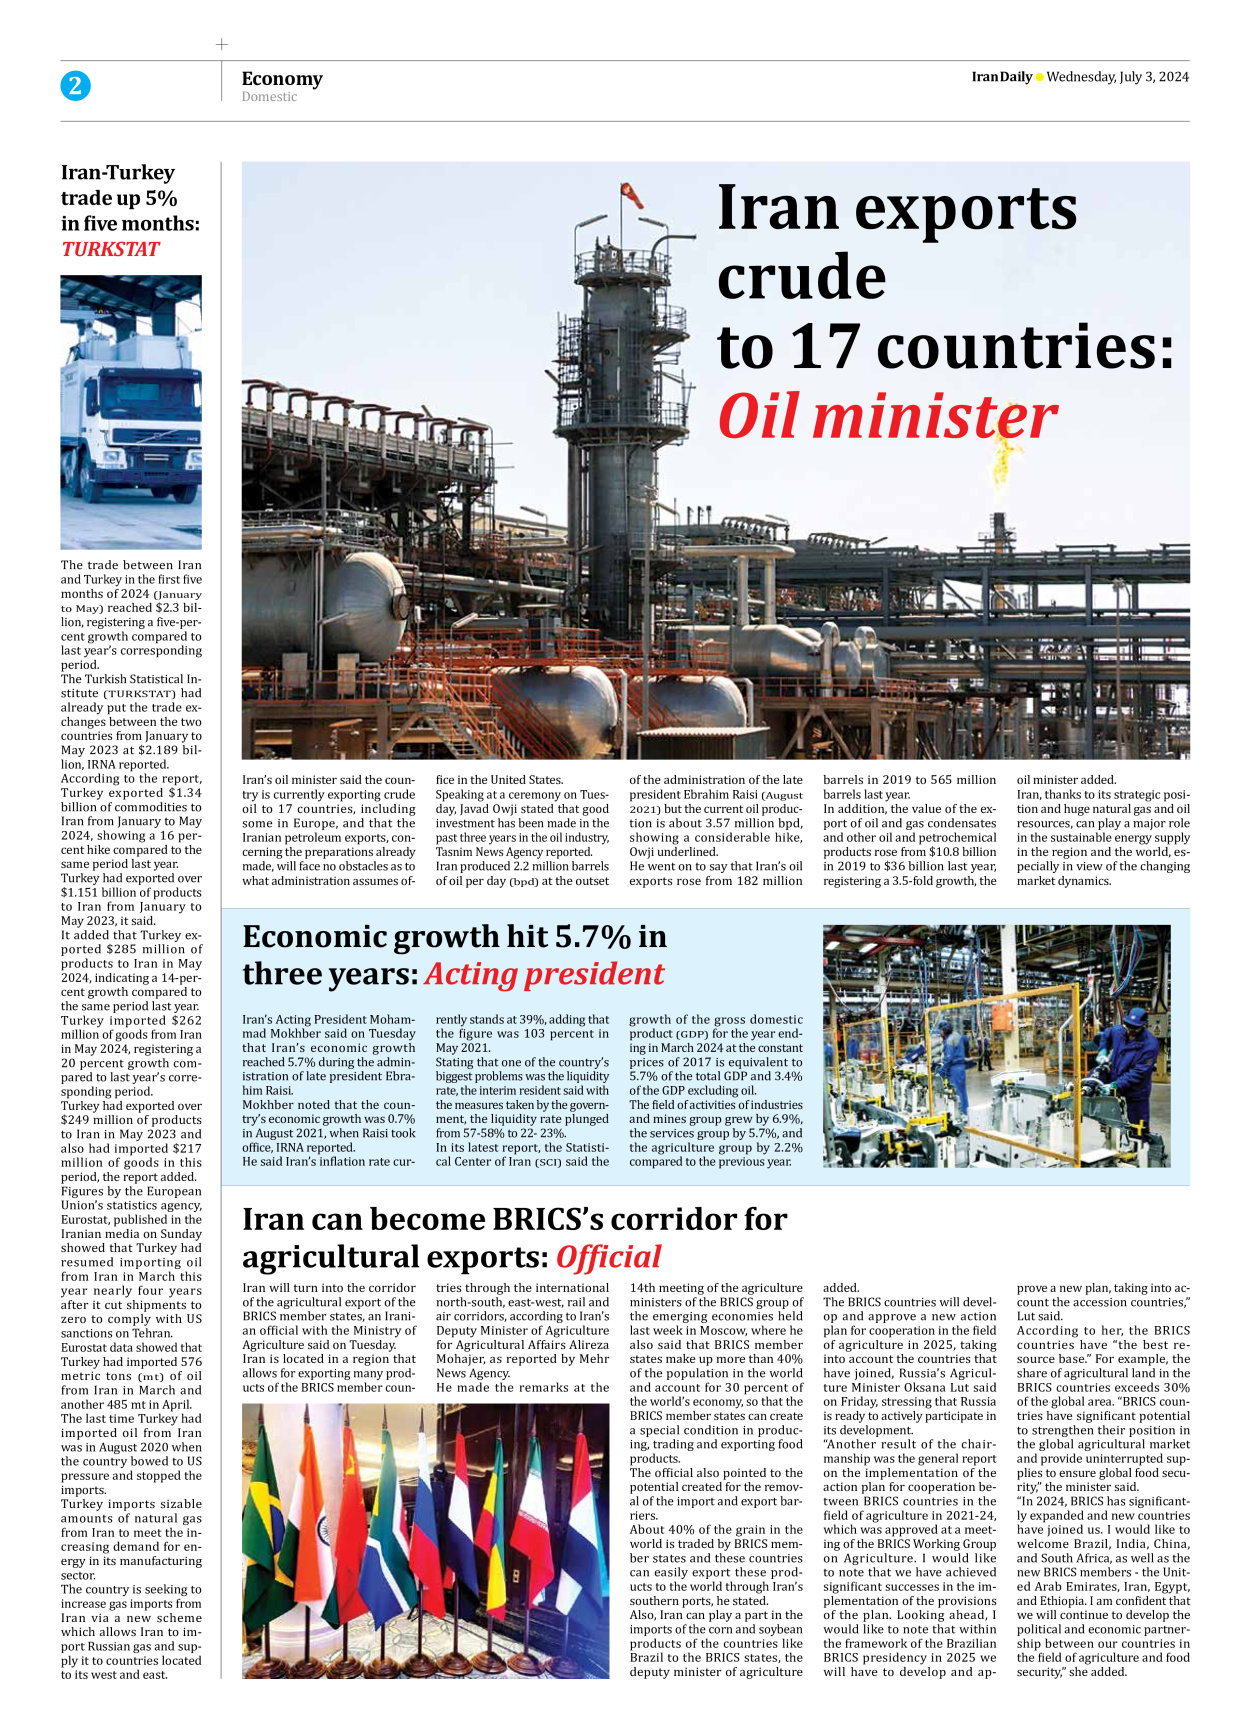 Iran Daily - Number Seven Thousand Five Hundred and Ninety Five - 03 July 2024 - Page 2